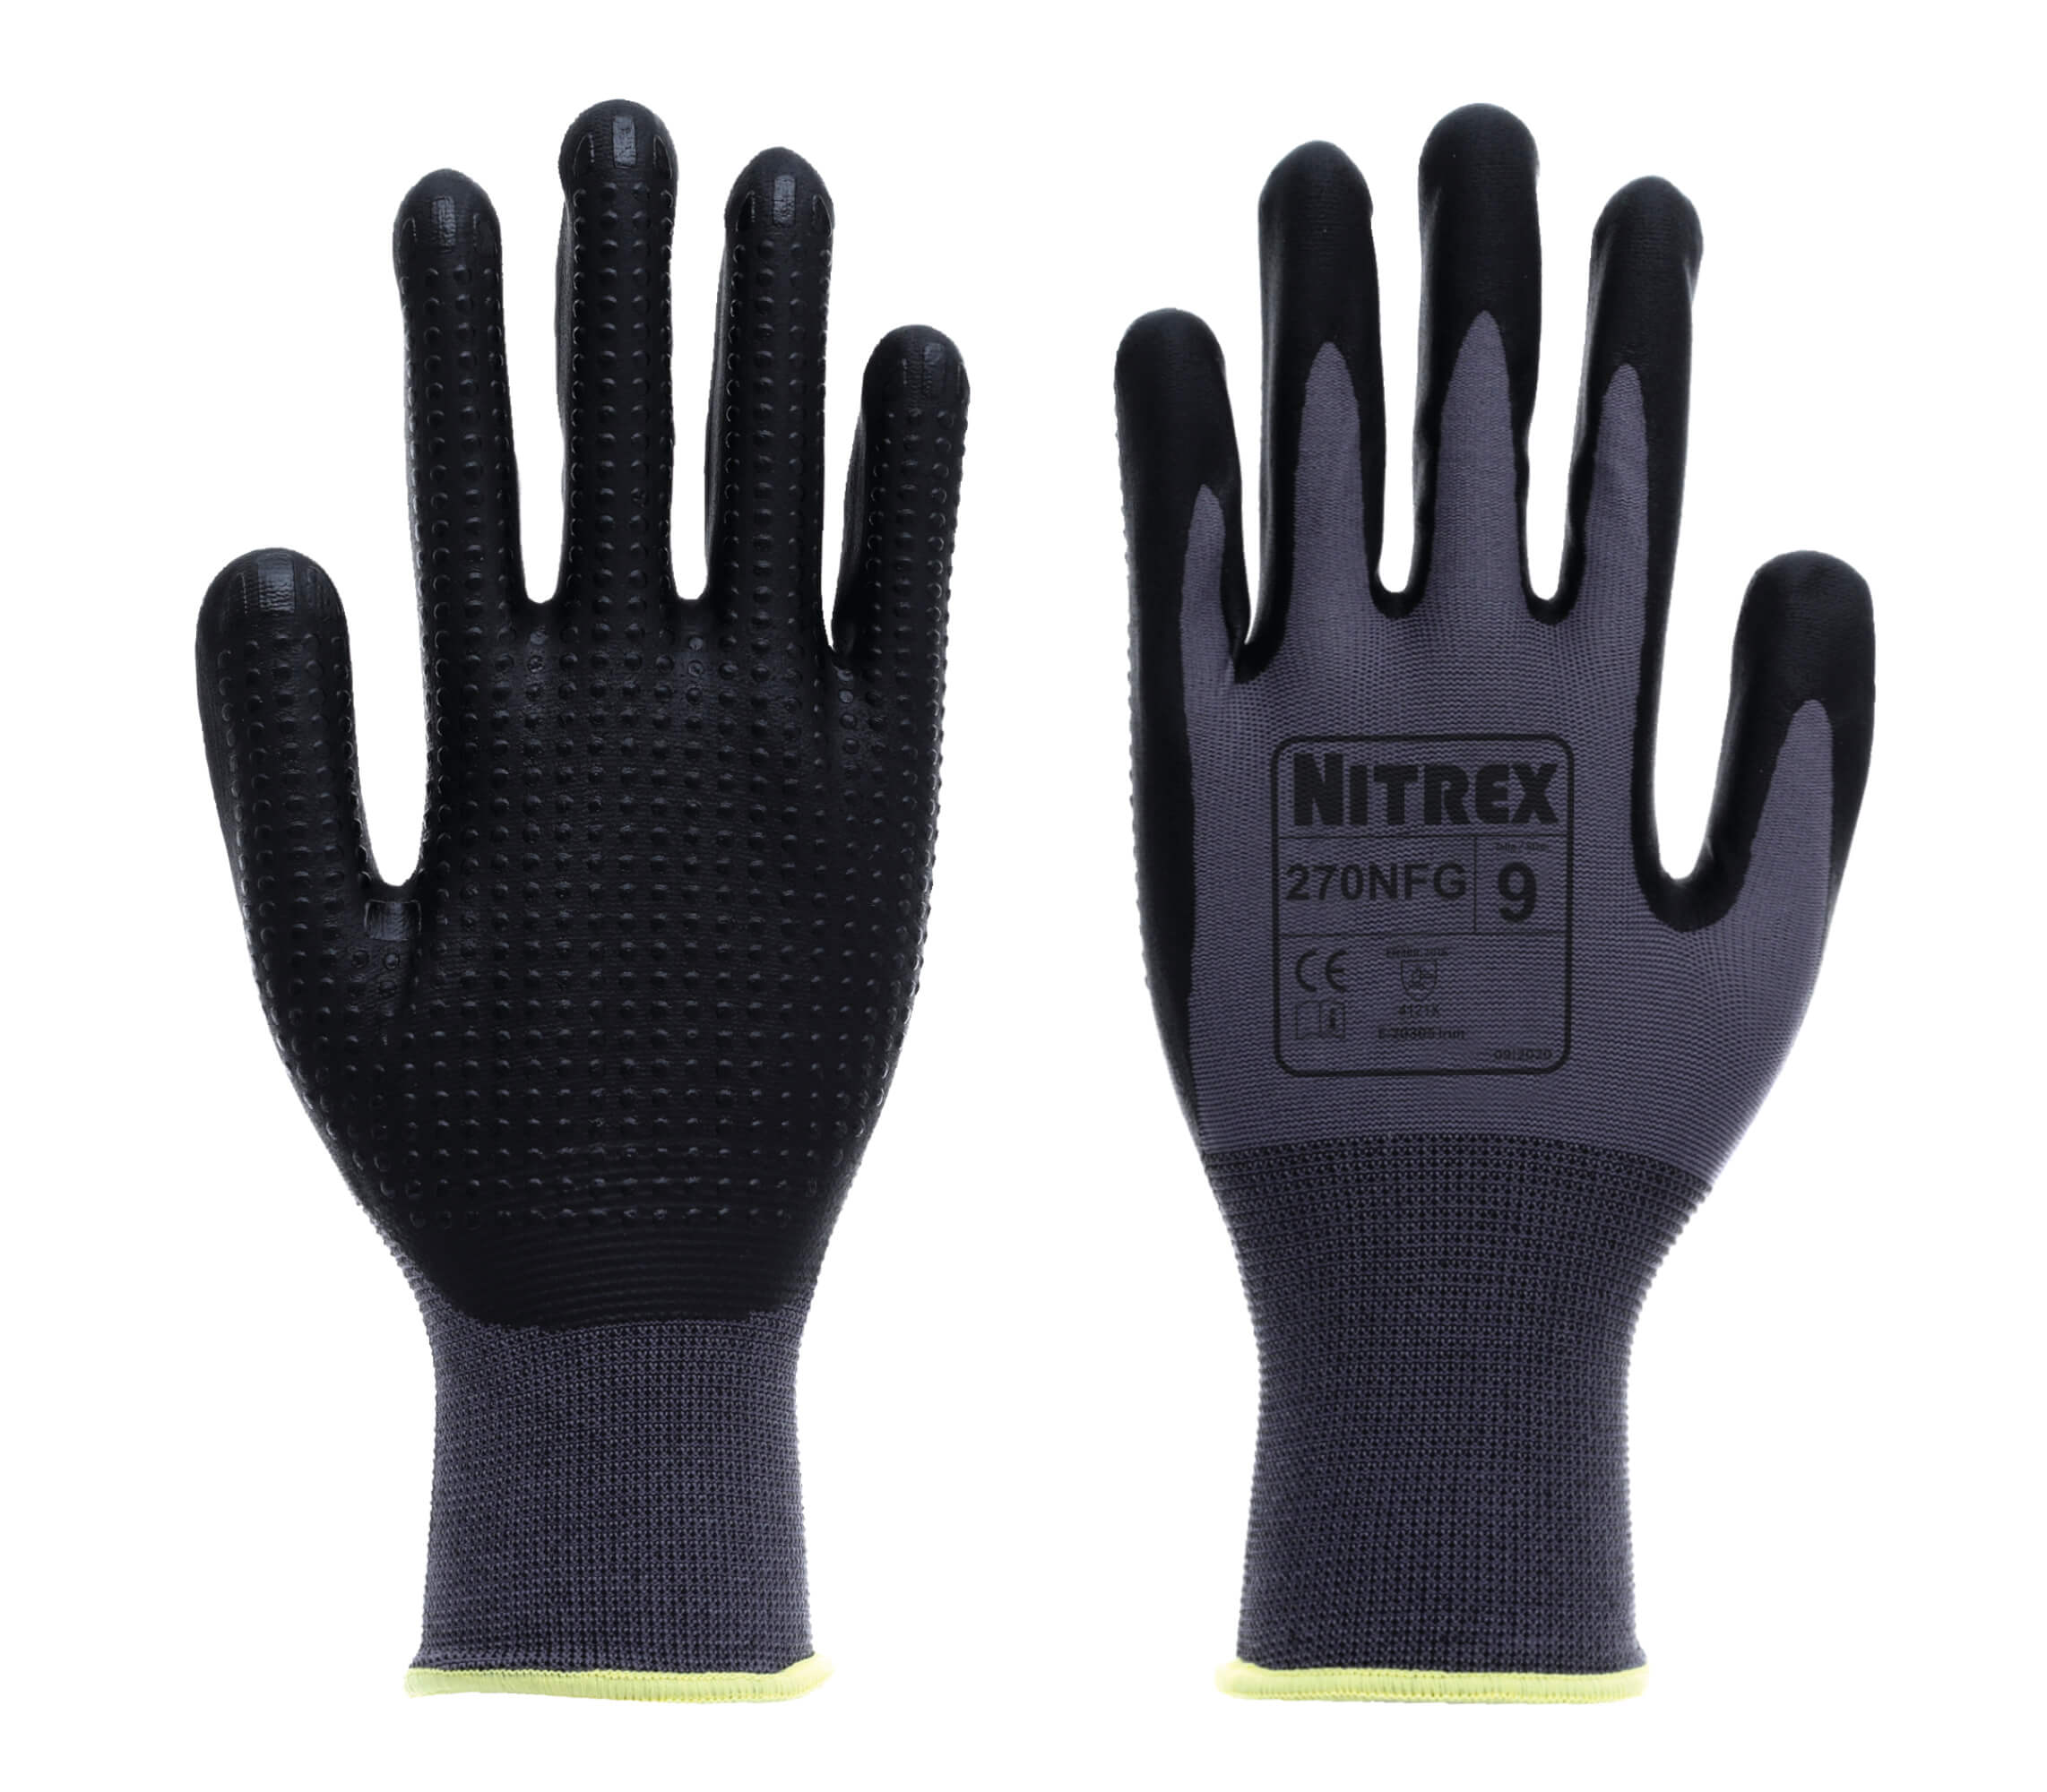 Nitrex 270NFG - Grey Black Gloves with Grip Dots - Foam Nitrile Palm Coated - Size 6/XS